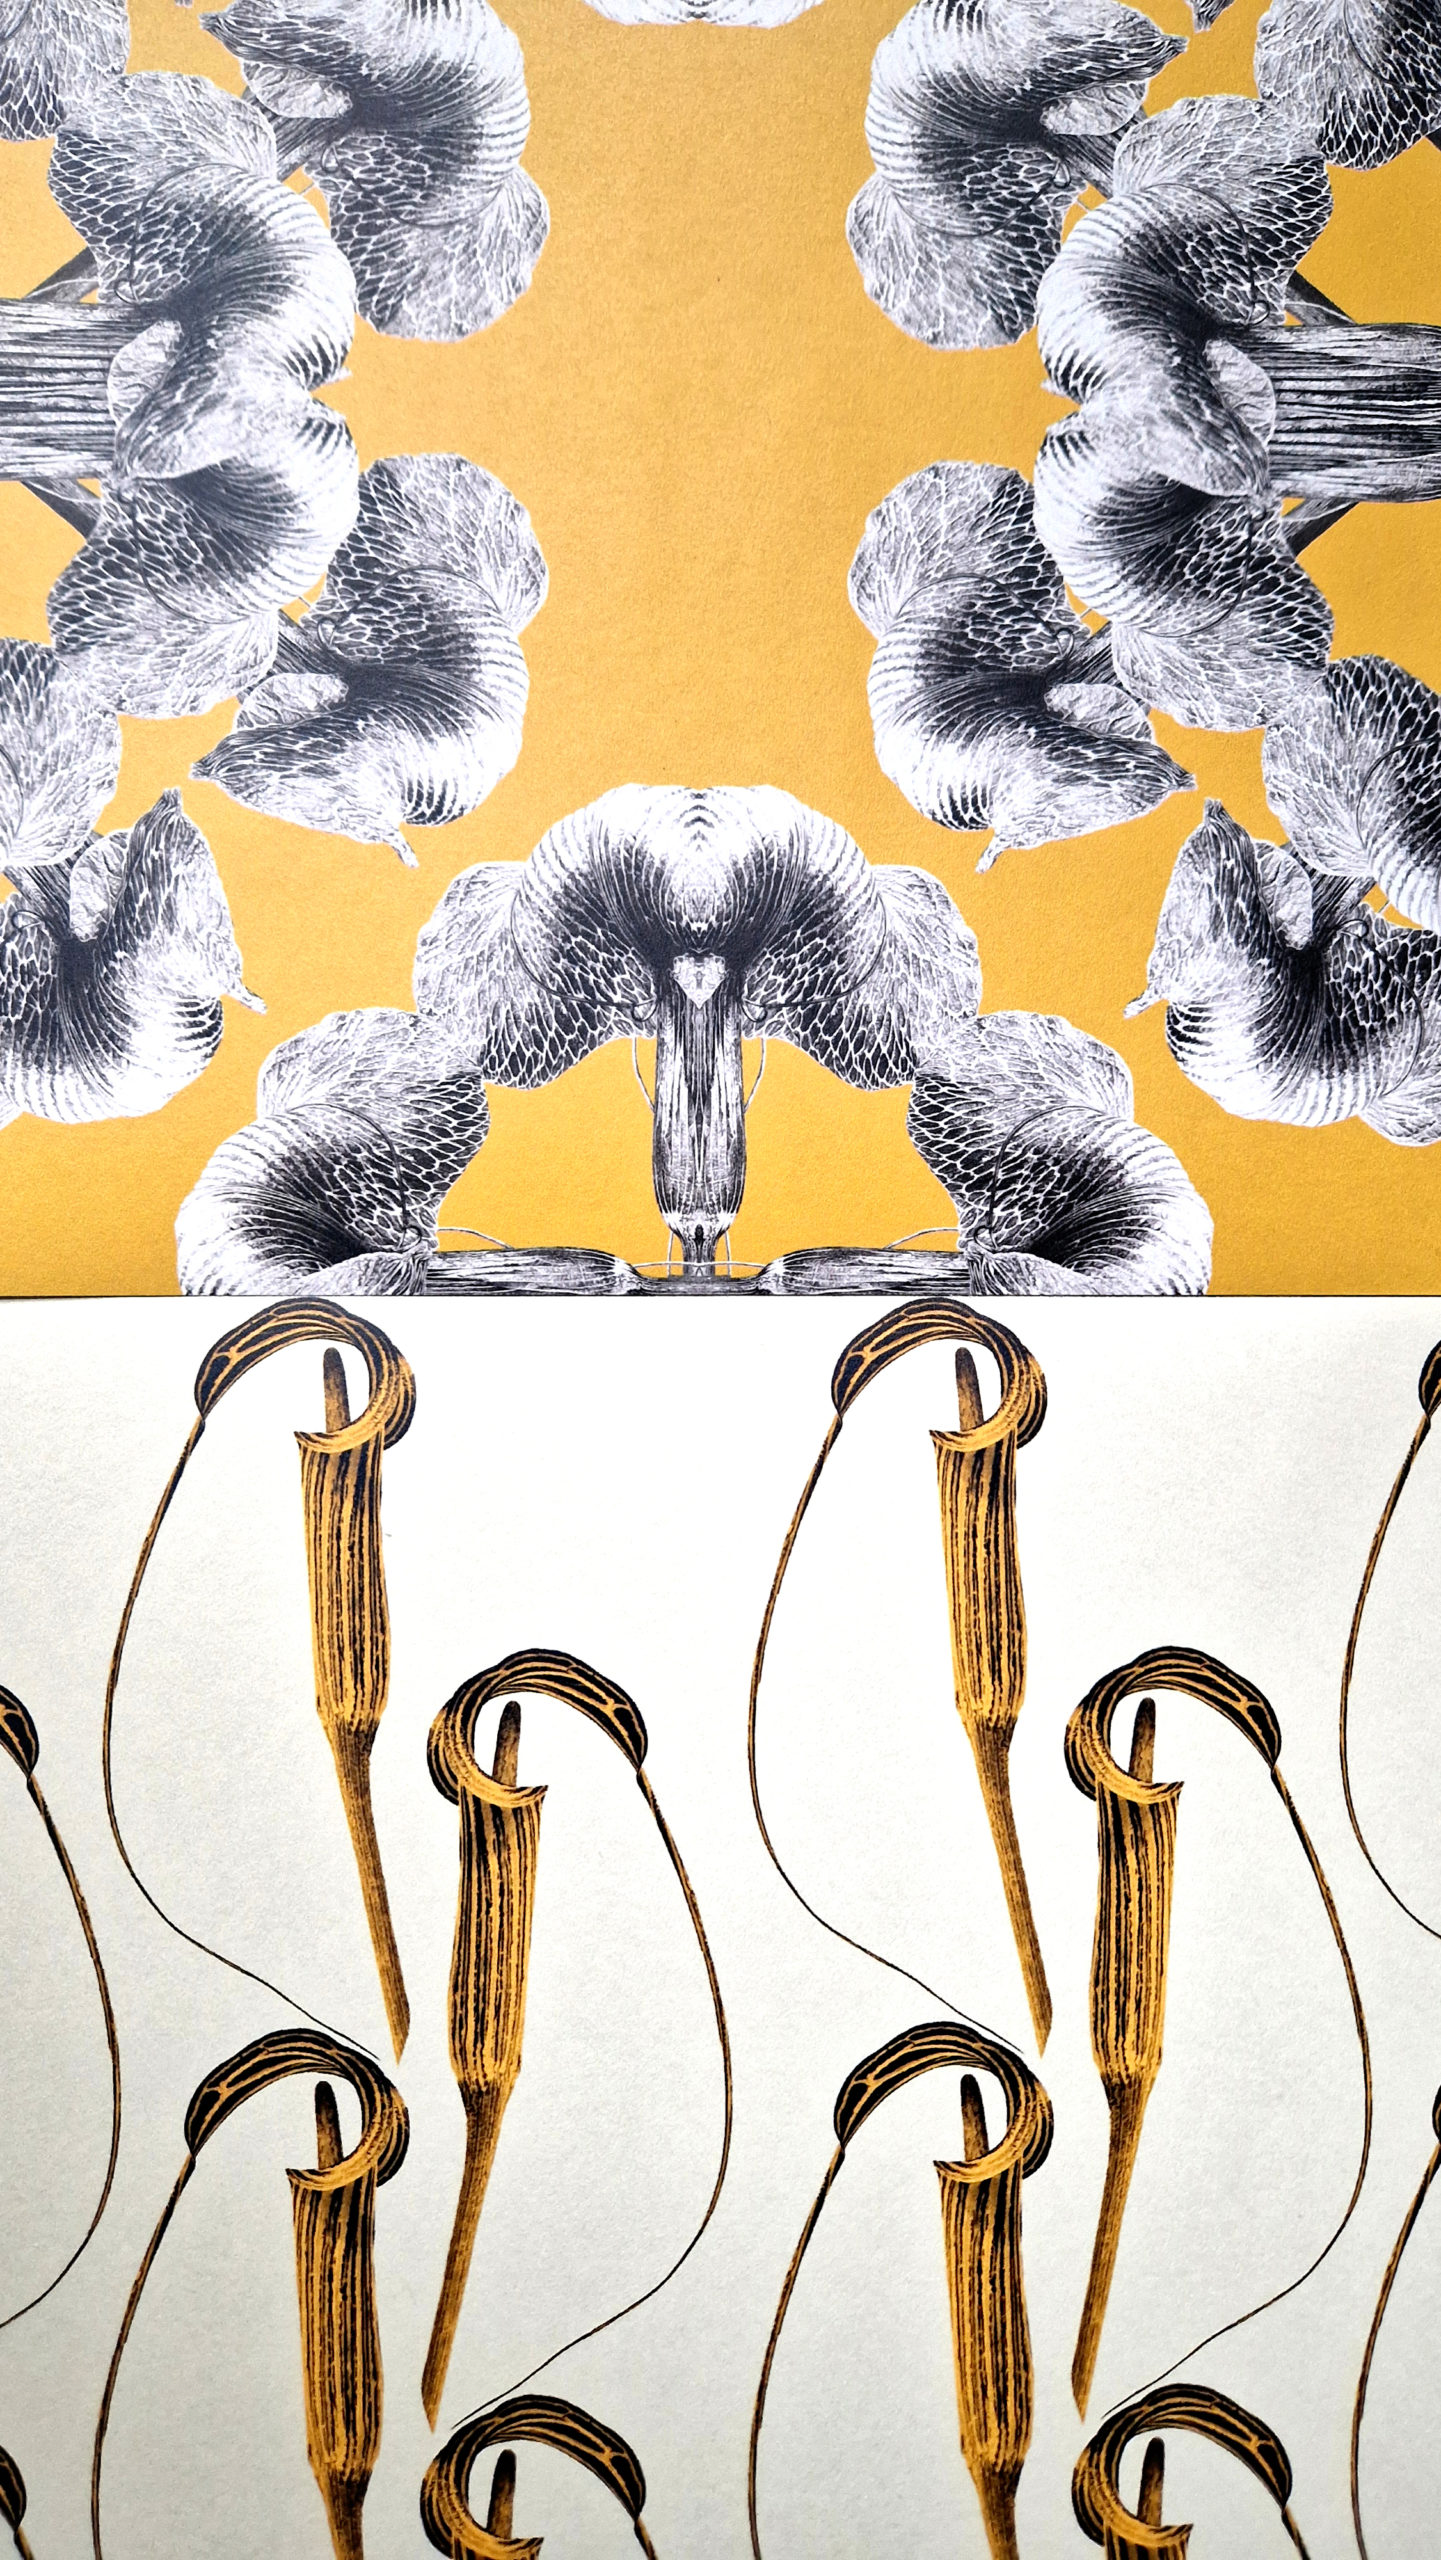 Wallpaper designs featuring illustrations by Marianne Hazlewood